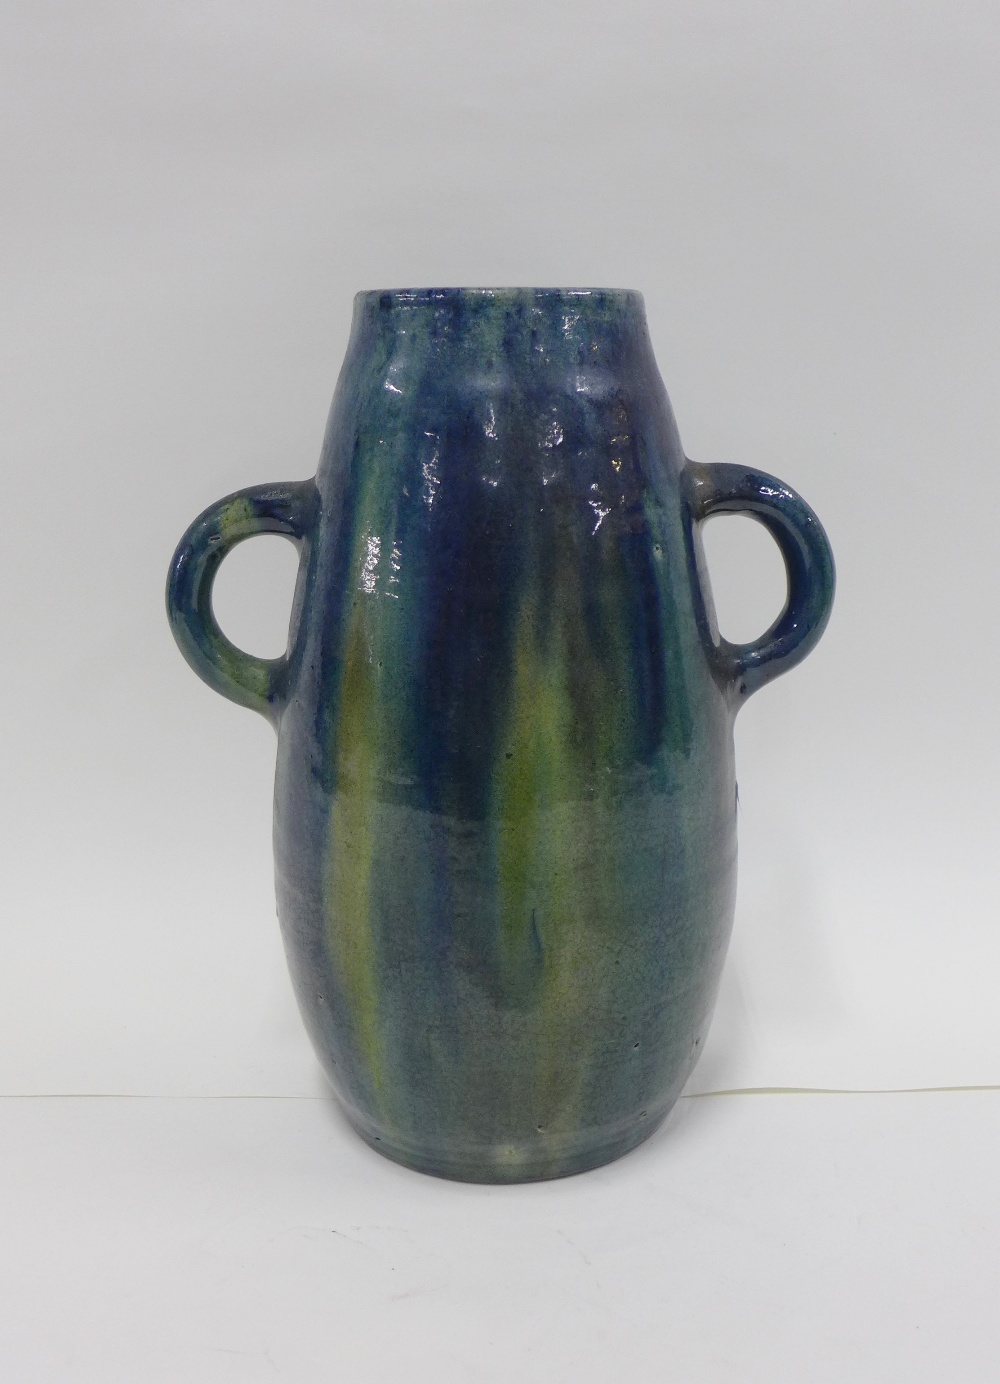 Continental art pottery vase with looping handles and a green and blue streaked glaze, 32cm